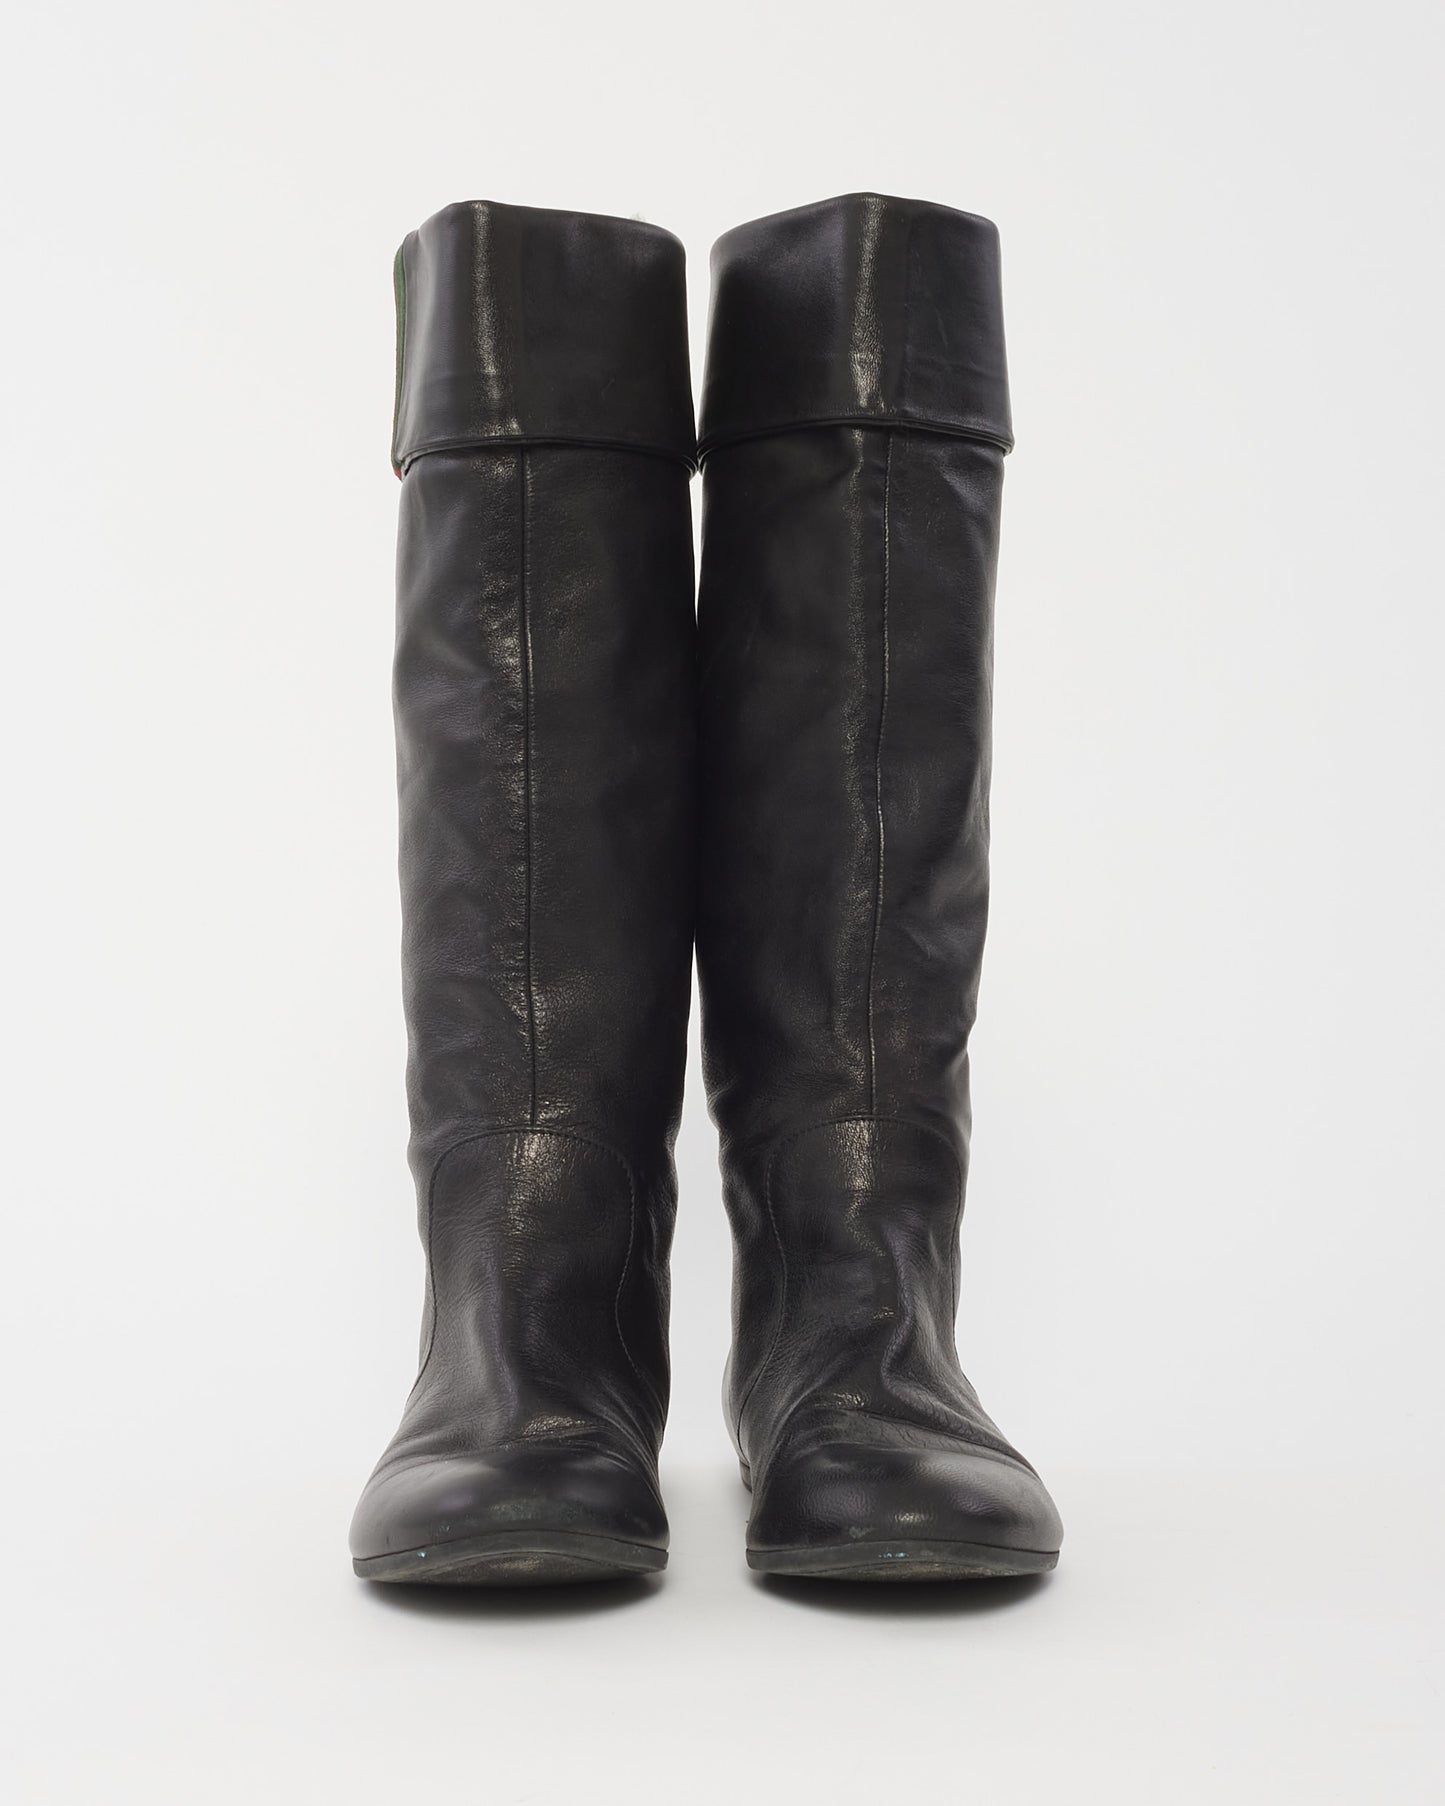 Gucci Black Leather Foldover Web Knee-High Boots -37